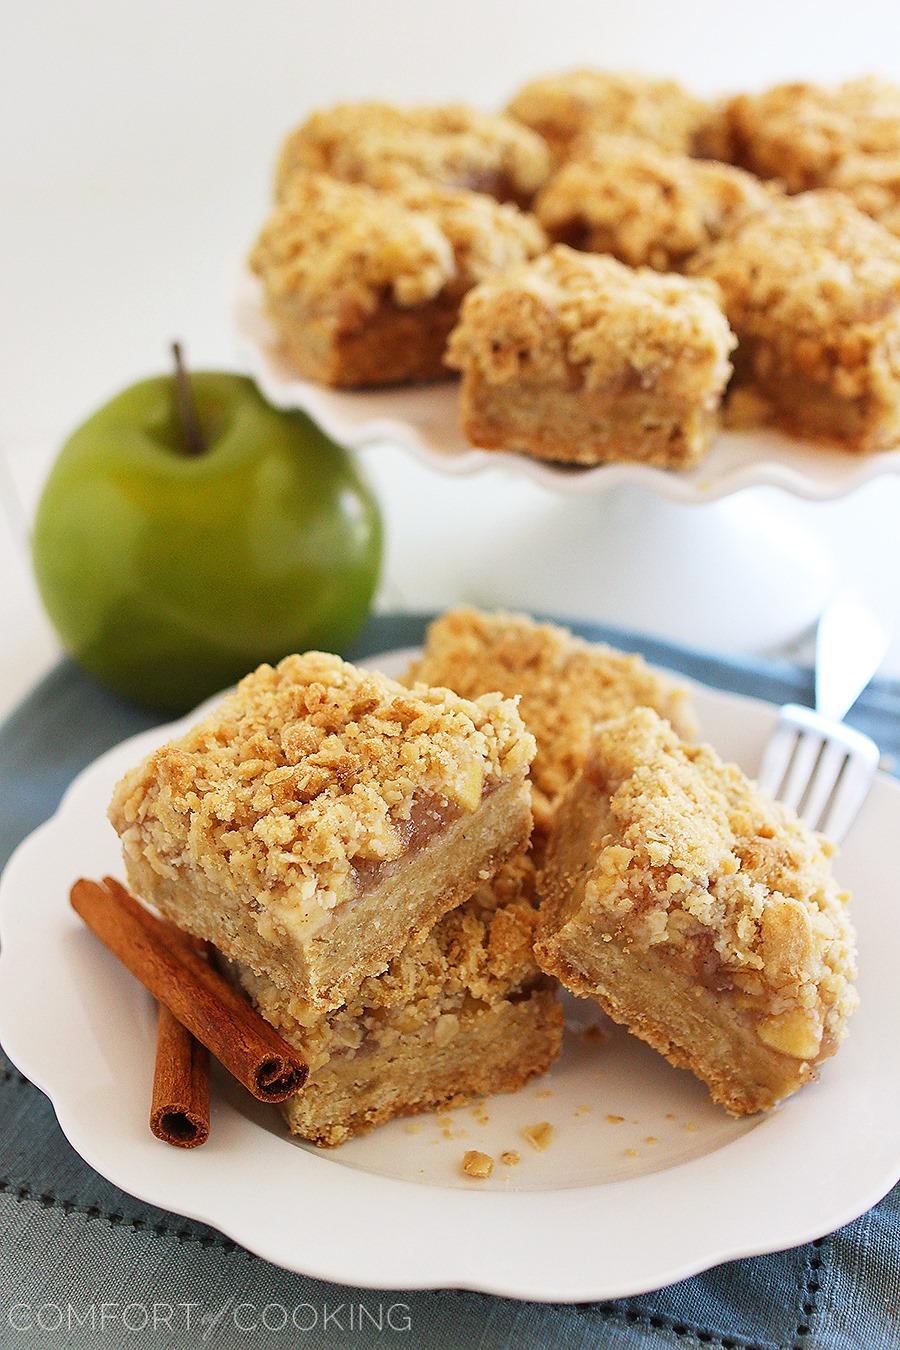 Spiced Apple-Caramel Crumble Bars – These soft, sweet caramel apple bars with a buttery shortbread crust are easier than pie! | thecomfortofcooking.com